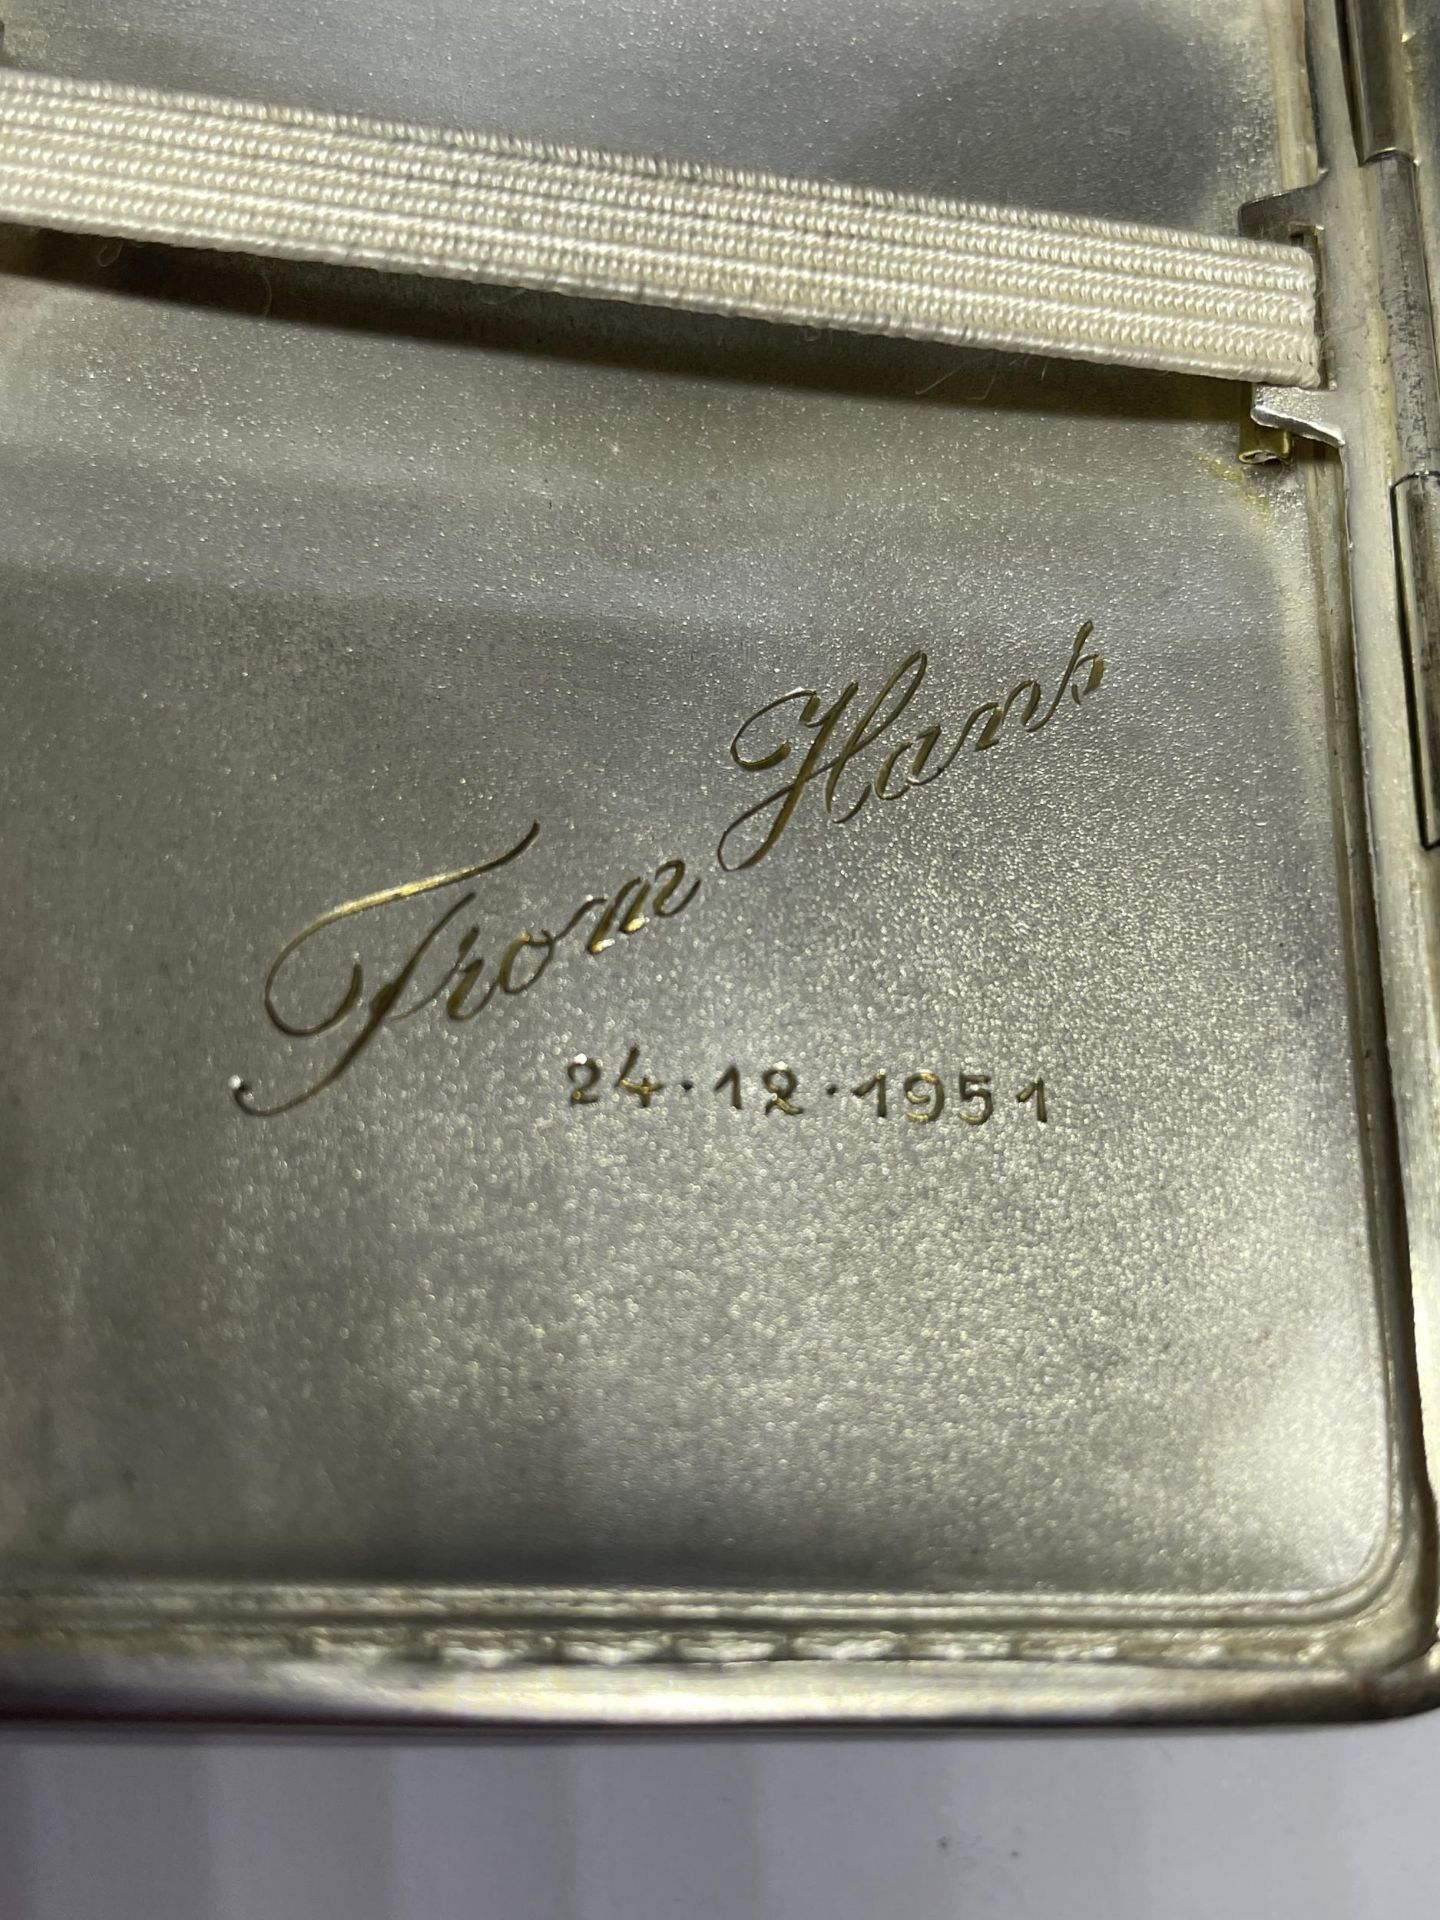 A GERMAN CIGARETTE CASE ENGRAVED MAISIE TO THE FRONT AND FROM HANS 24.12.1951 - Image 5 of 5